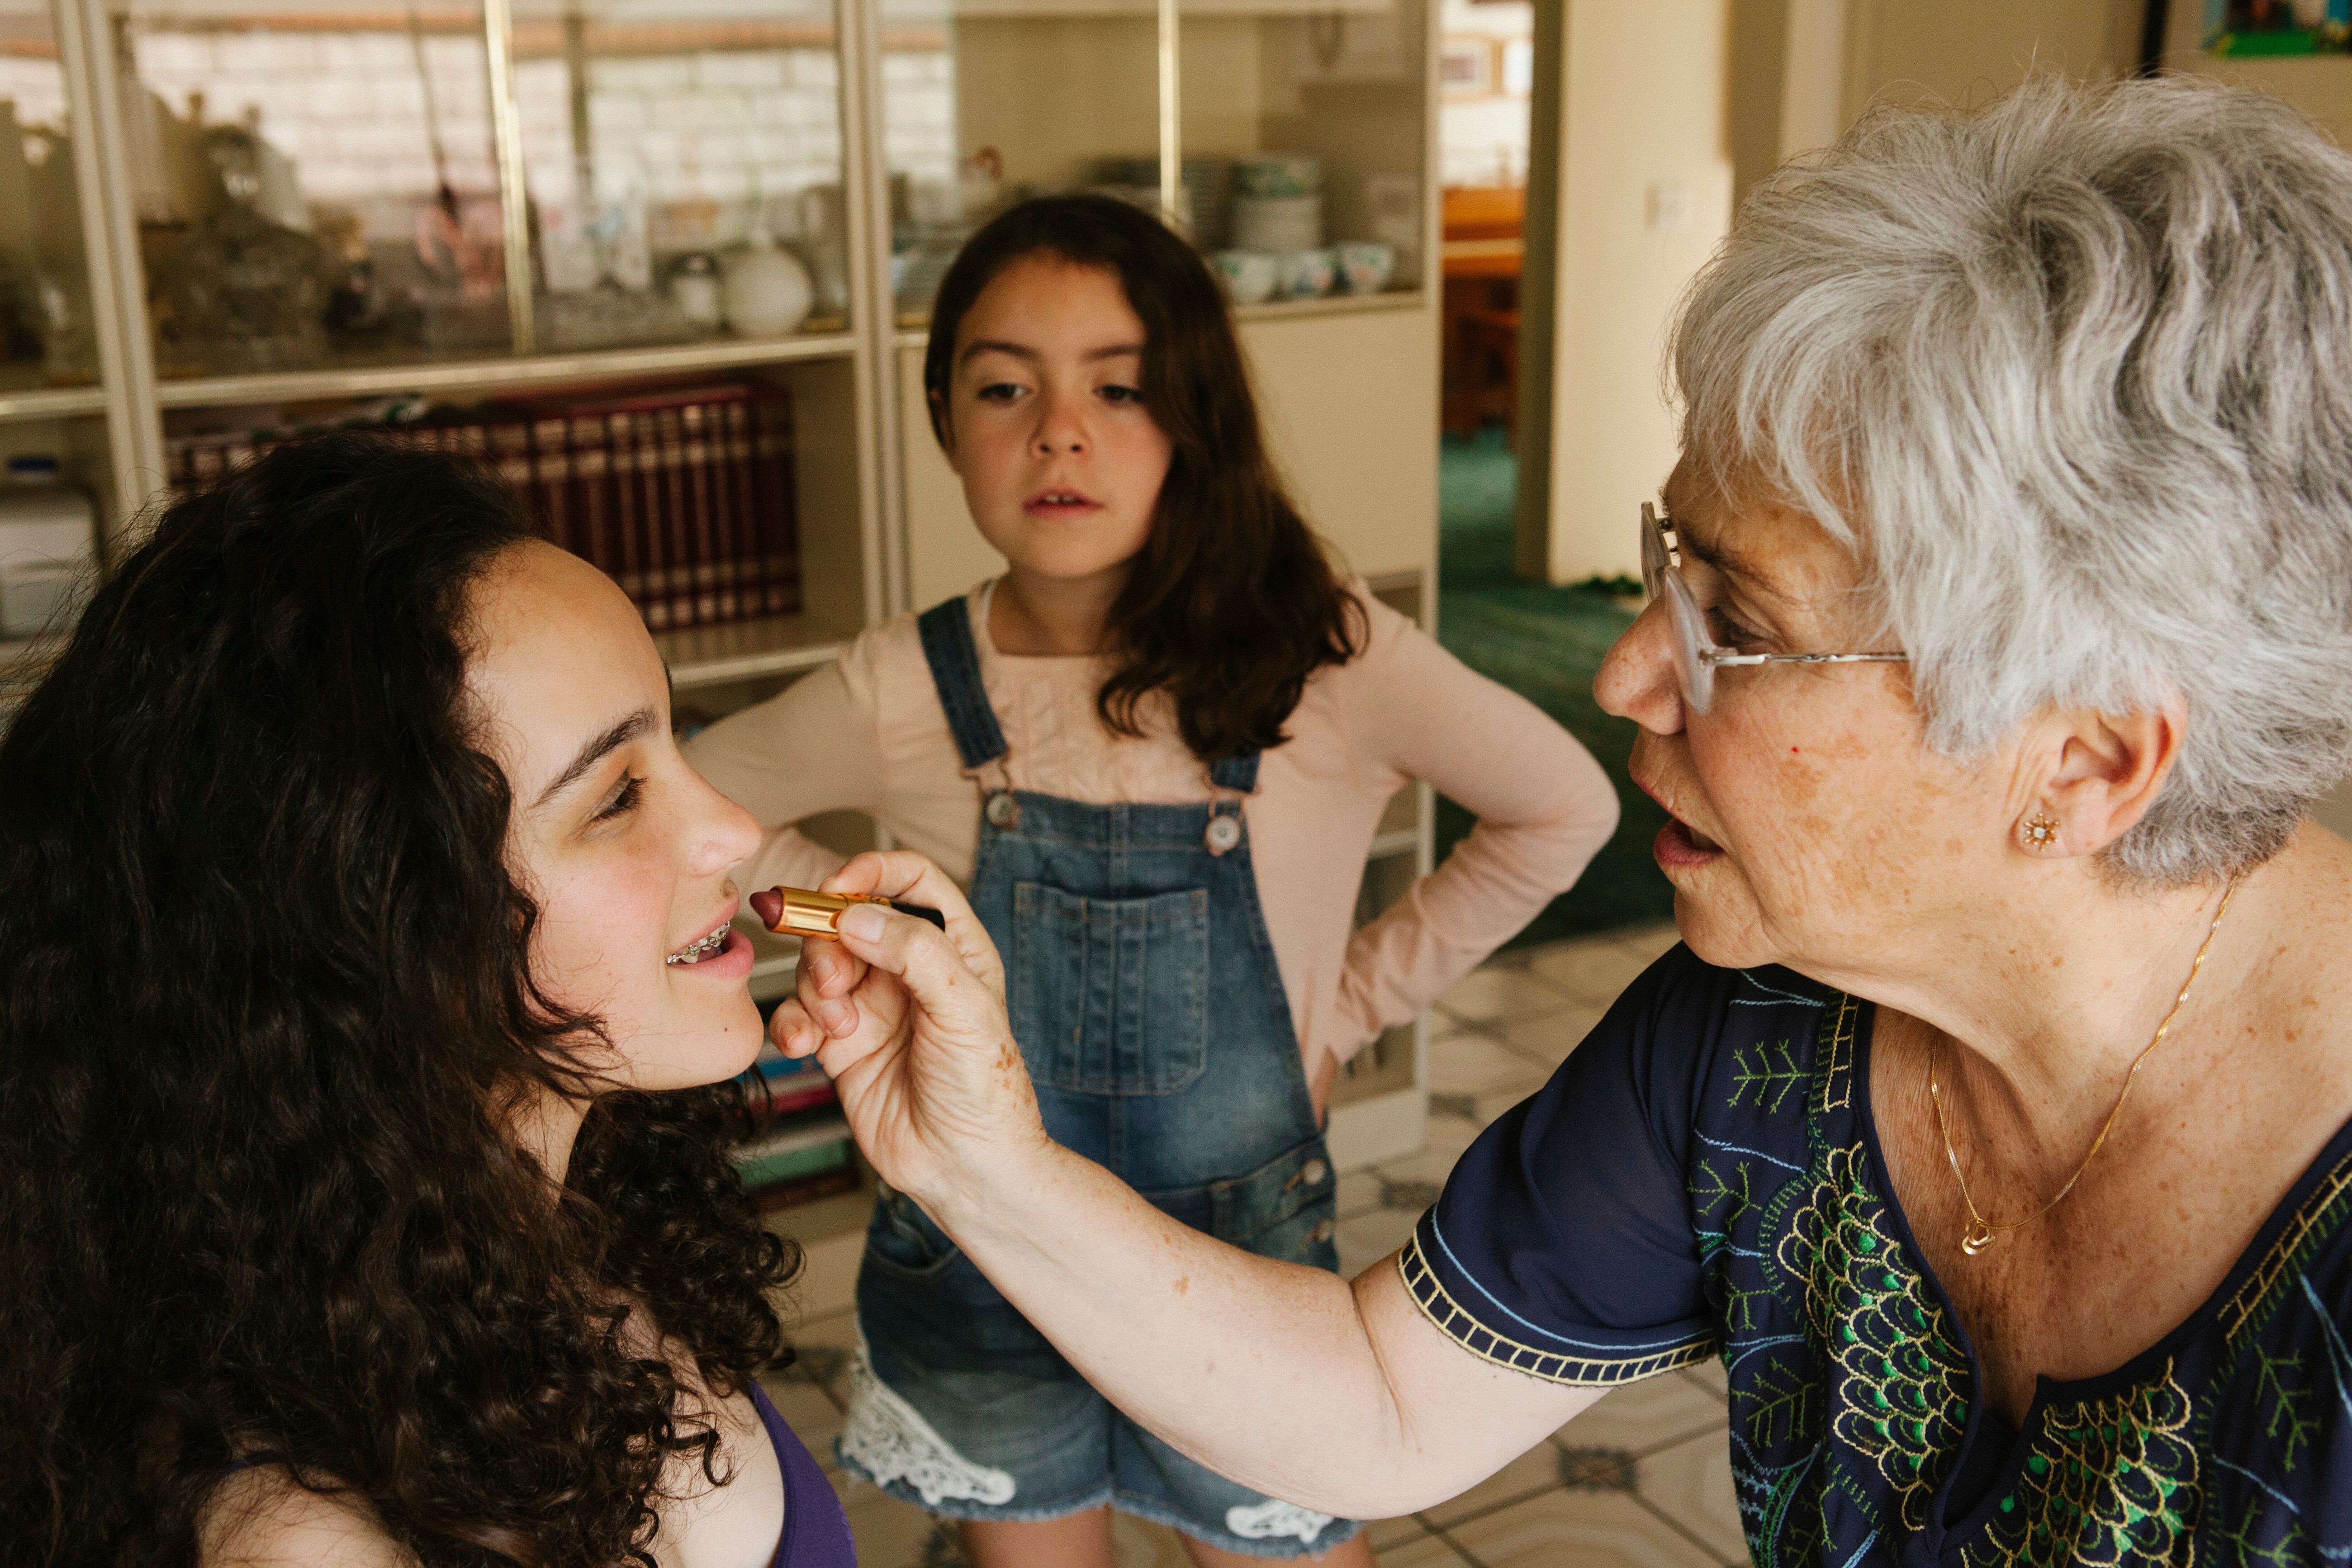 A grandmother putting lipstick on her granddaughter | Source: Getty Images